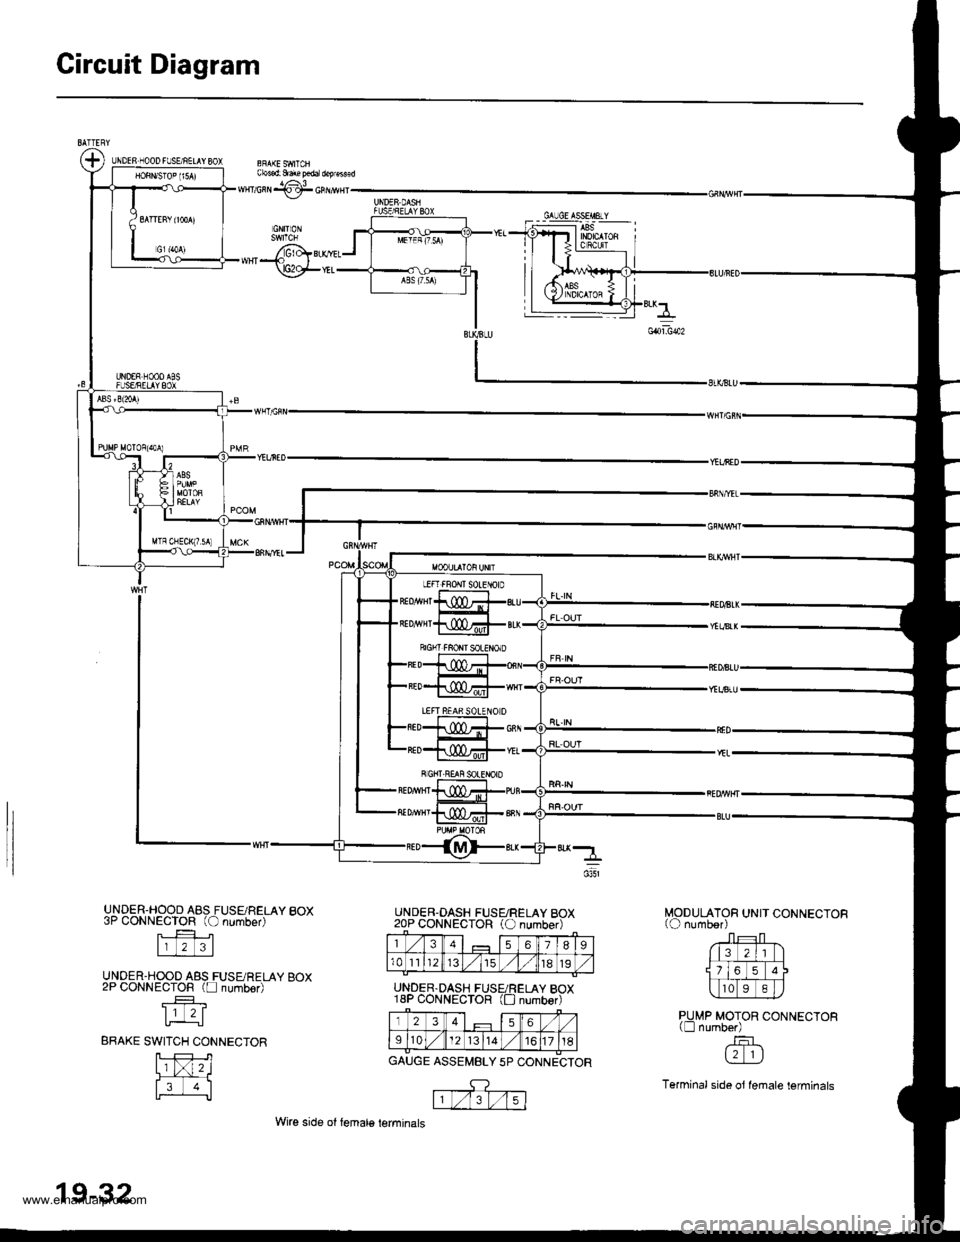 HONDA CR-V 2000 RD1-RD3 / 1.G Service Manual 
Circuit Diagram
UNDFS I]OOD FISAFELAY 8OXCbsod: &rrc ped. deprelled
wHT/GrN -tjF GFrlrrvril
GNITION
*oJG\*"\€F*,-
UNDER-HOOD A8S FUSE/FELAY BOX3P CONNECTOR (O number)
t_--t l-|ll"1
UNDER.HOOO A8